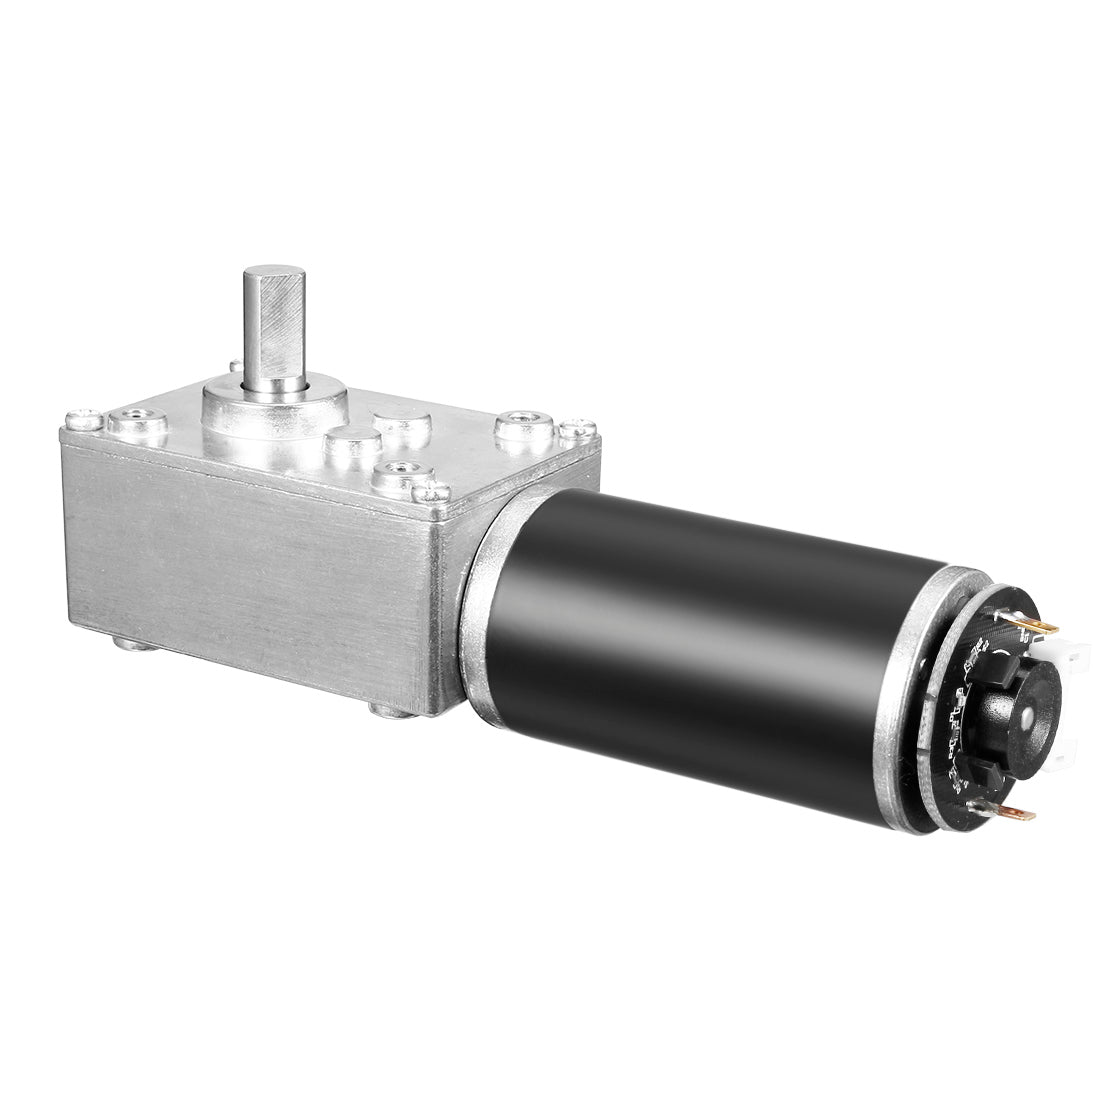 uxcell Uxcell DC 12V 7RPM 30Kg.cm Self-Locking Worm Gear Motor With Encoder And Cable, High Torque Speed Reduction Motor